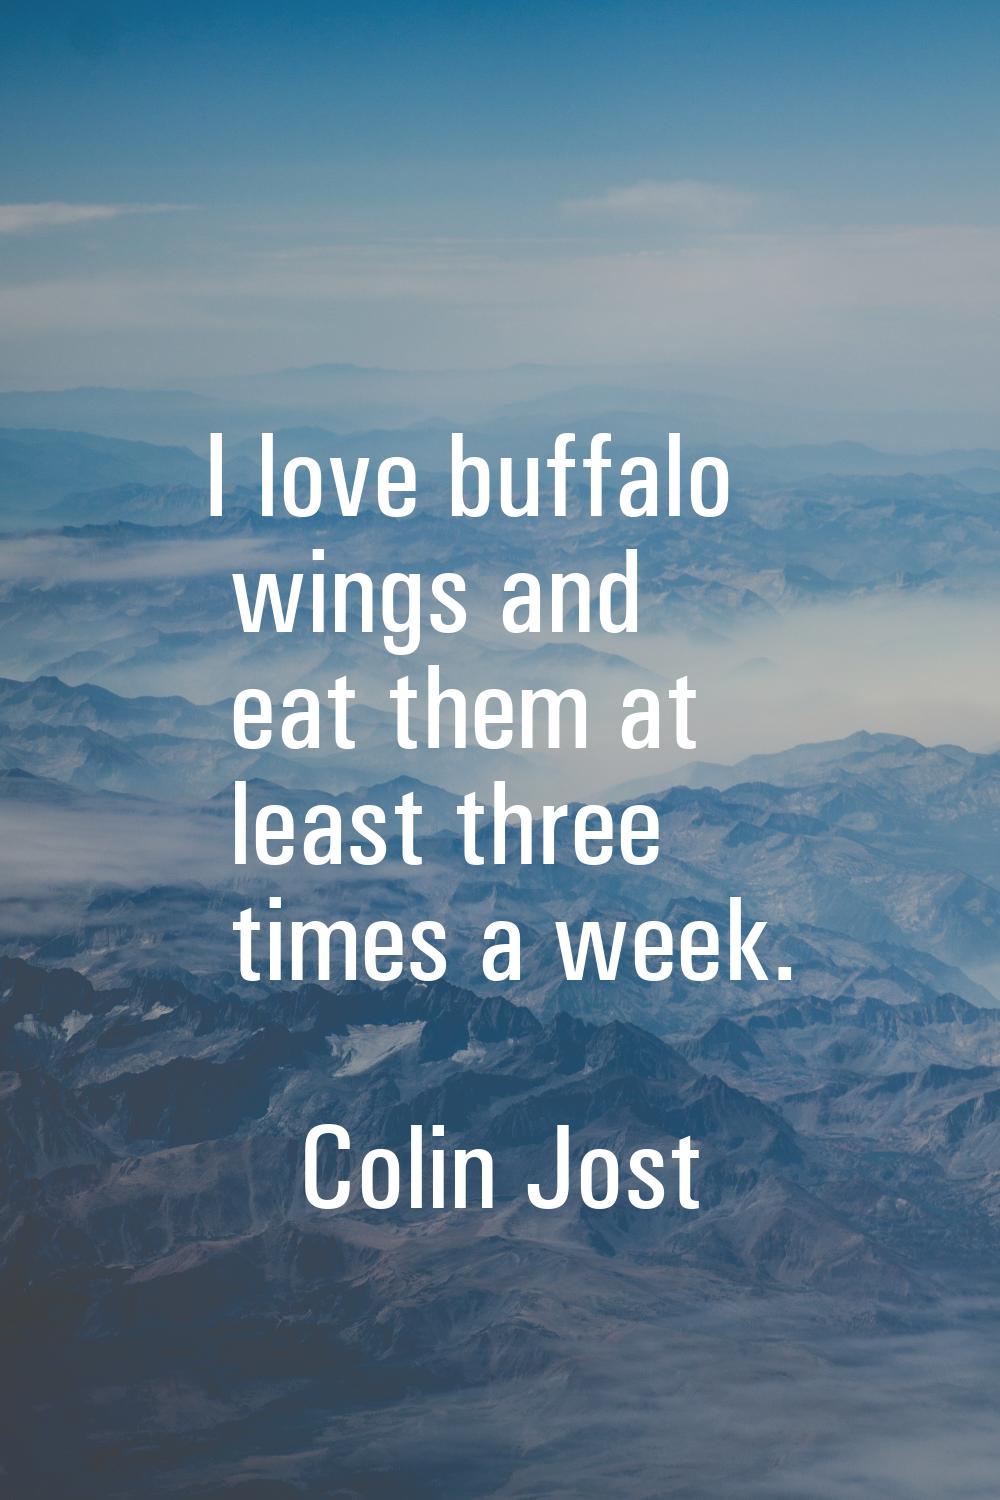 I love buffalo wings and eat them at least three times a week.